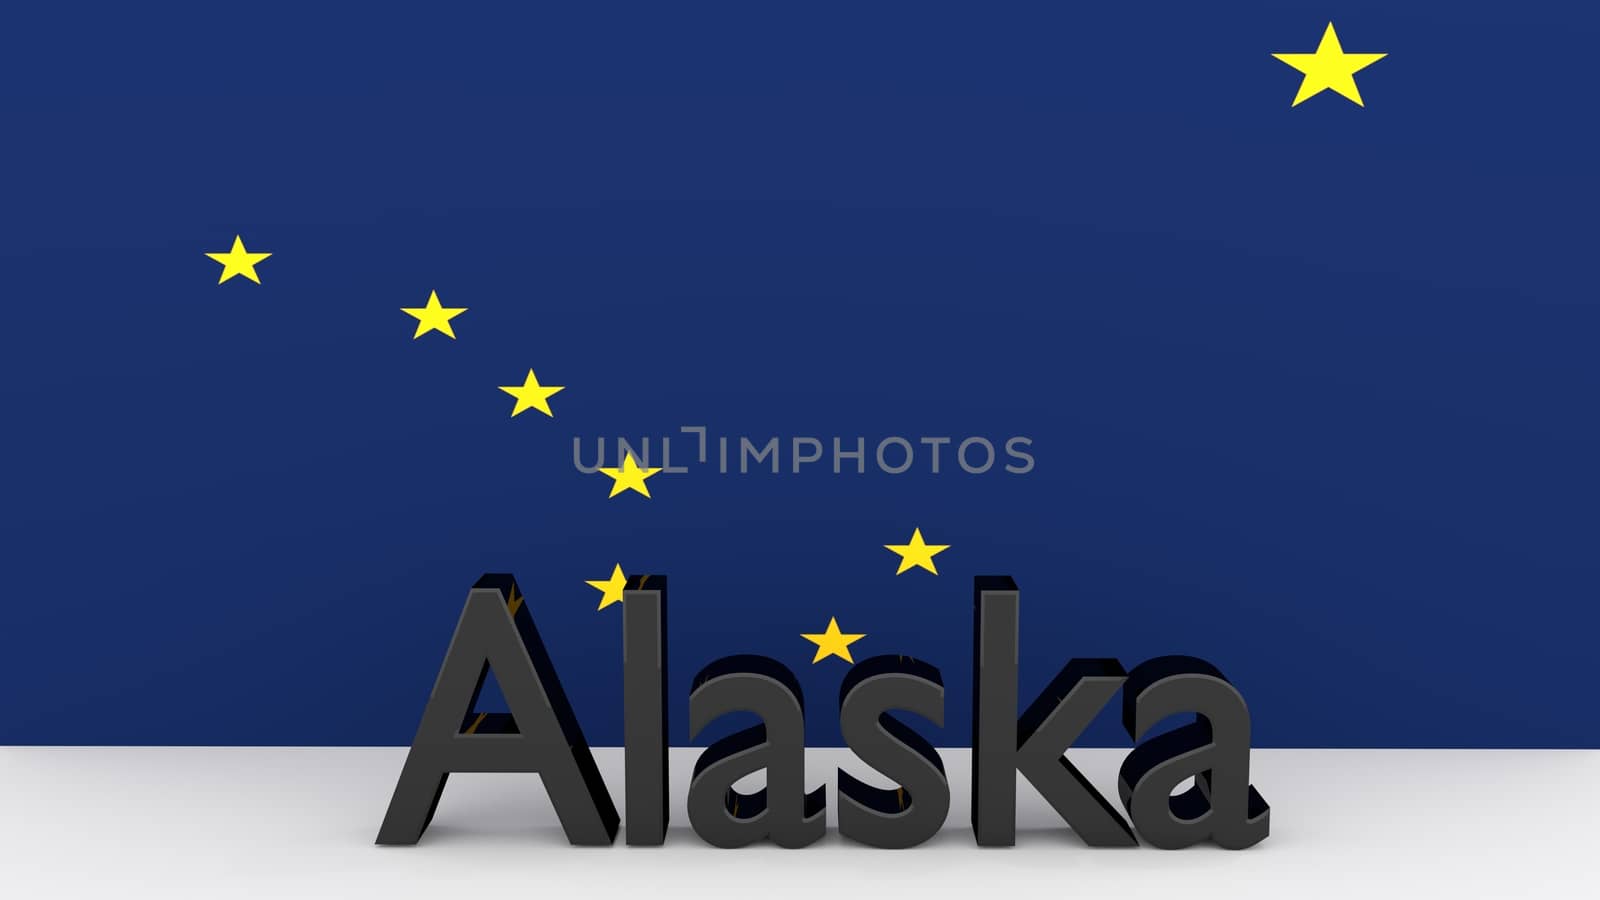 Writing with the name of the US state Alaska made of dark metal  in front of state flag